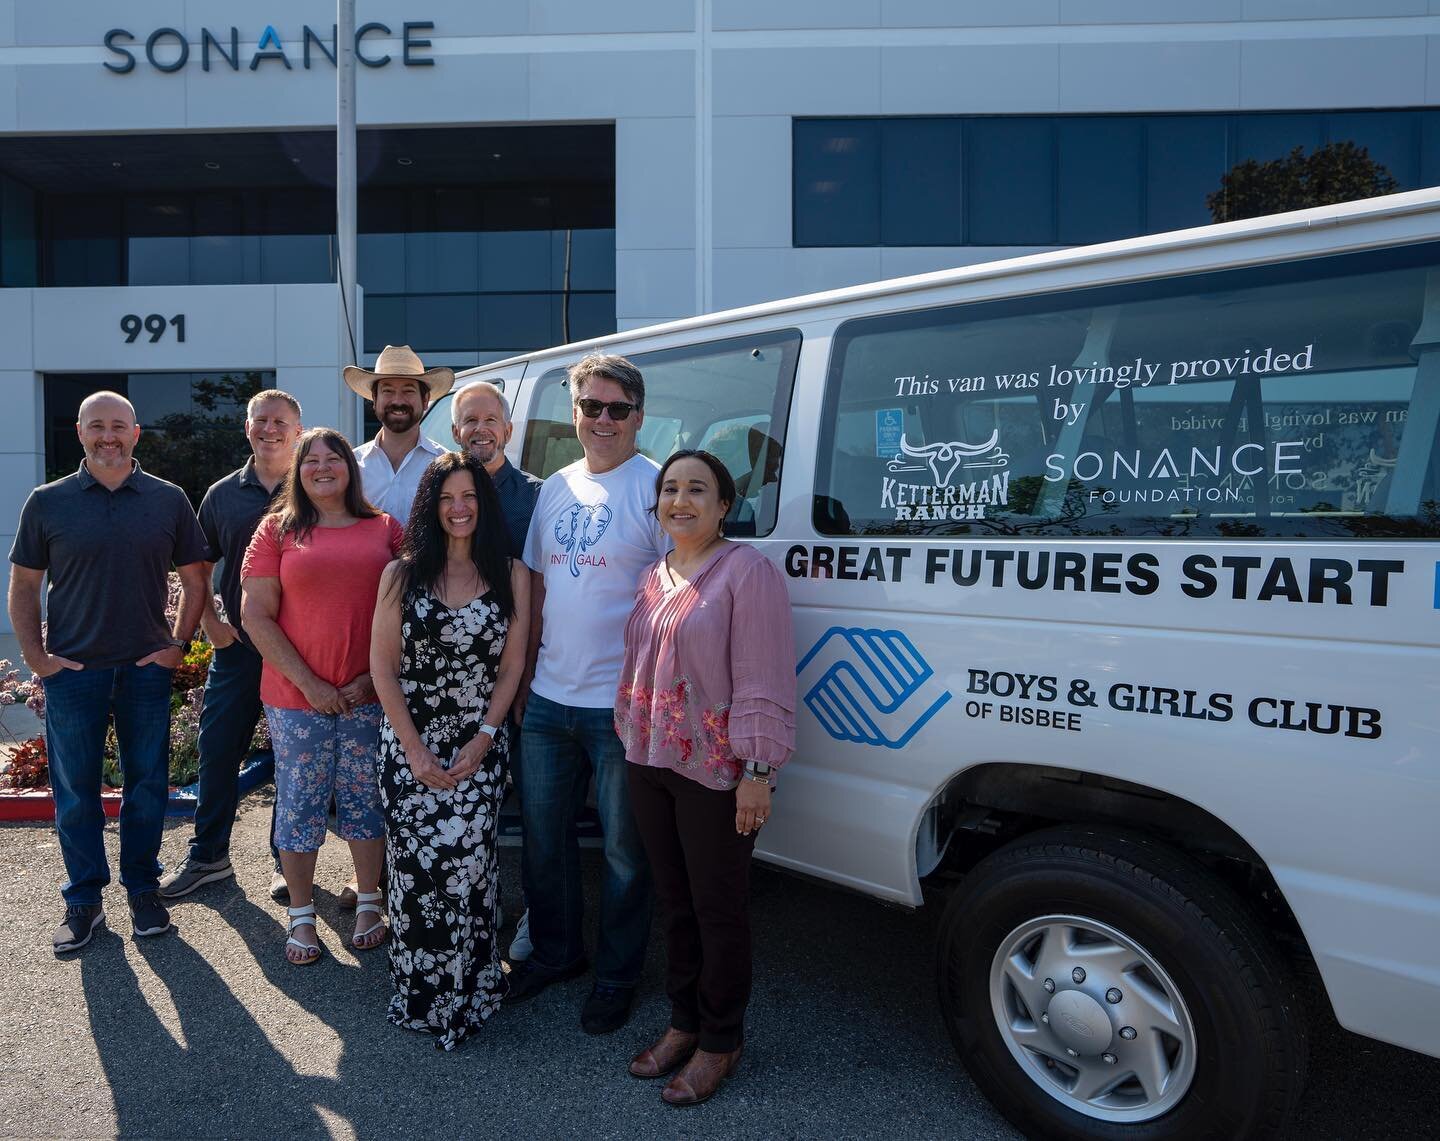 With generous donations from Scott Struthers, Rainbow Sandals Foundation, &amp; Ketterman Ranch, and with the help of Byron Roth and STRUT President Tommy Gaut, the Sonance Foundation sourced two 12 passenger vans for the Boys and Girls Club of Bisbe